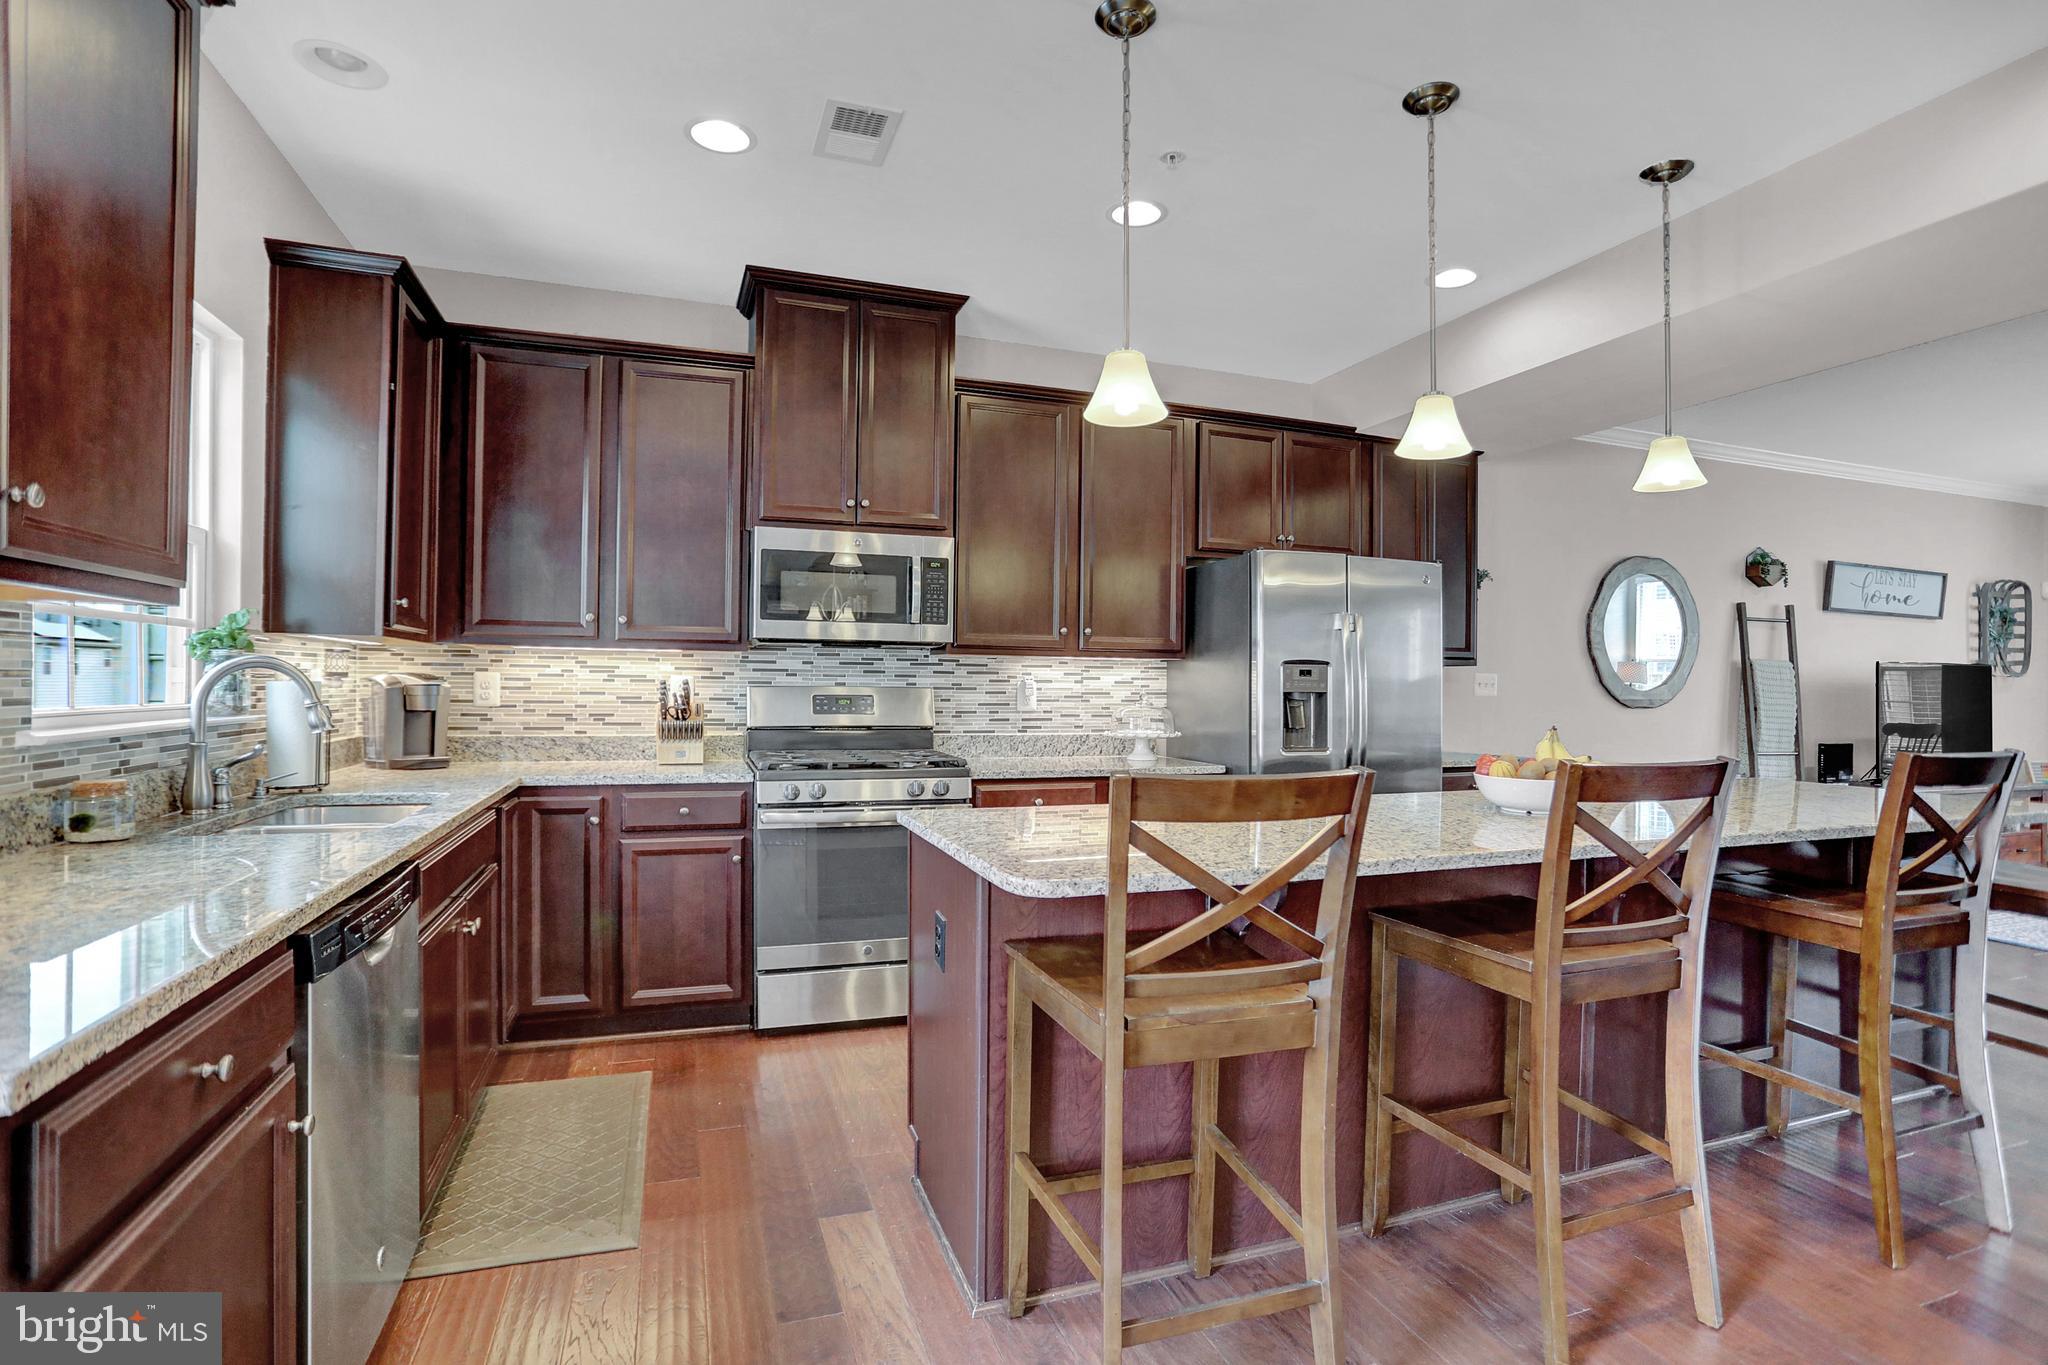 a kitchen with stainless steel appliances kitchen island granite countertop a sink a stove a dining table and chairs